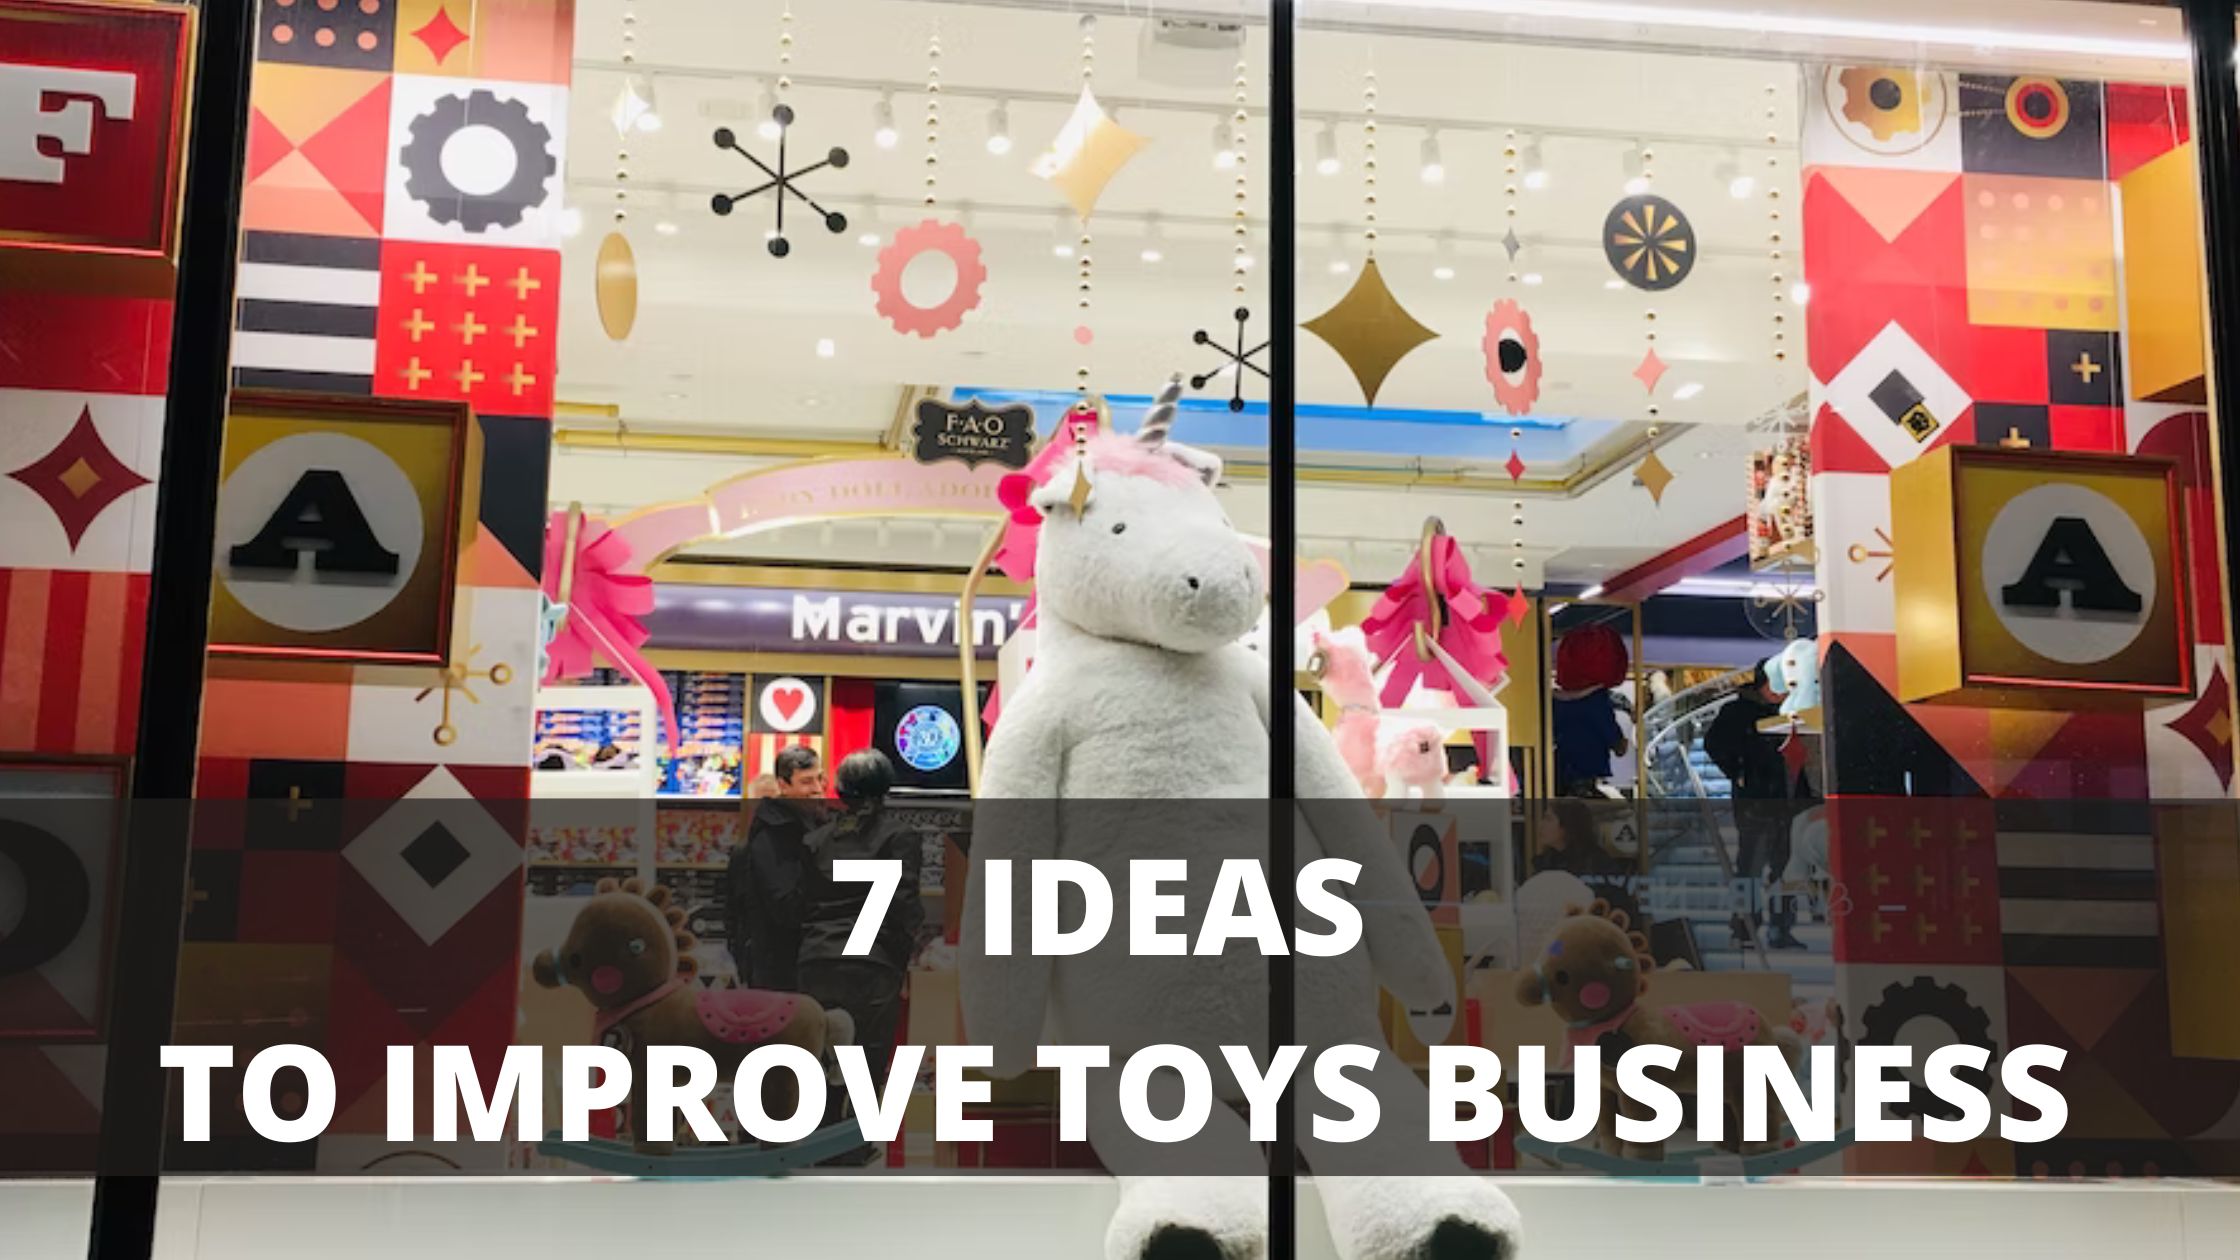 You are currently viewing 7 Best Toys Business Ideas to Improve Your Toys Business